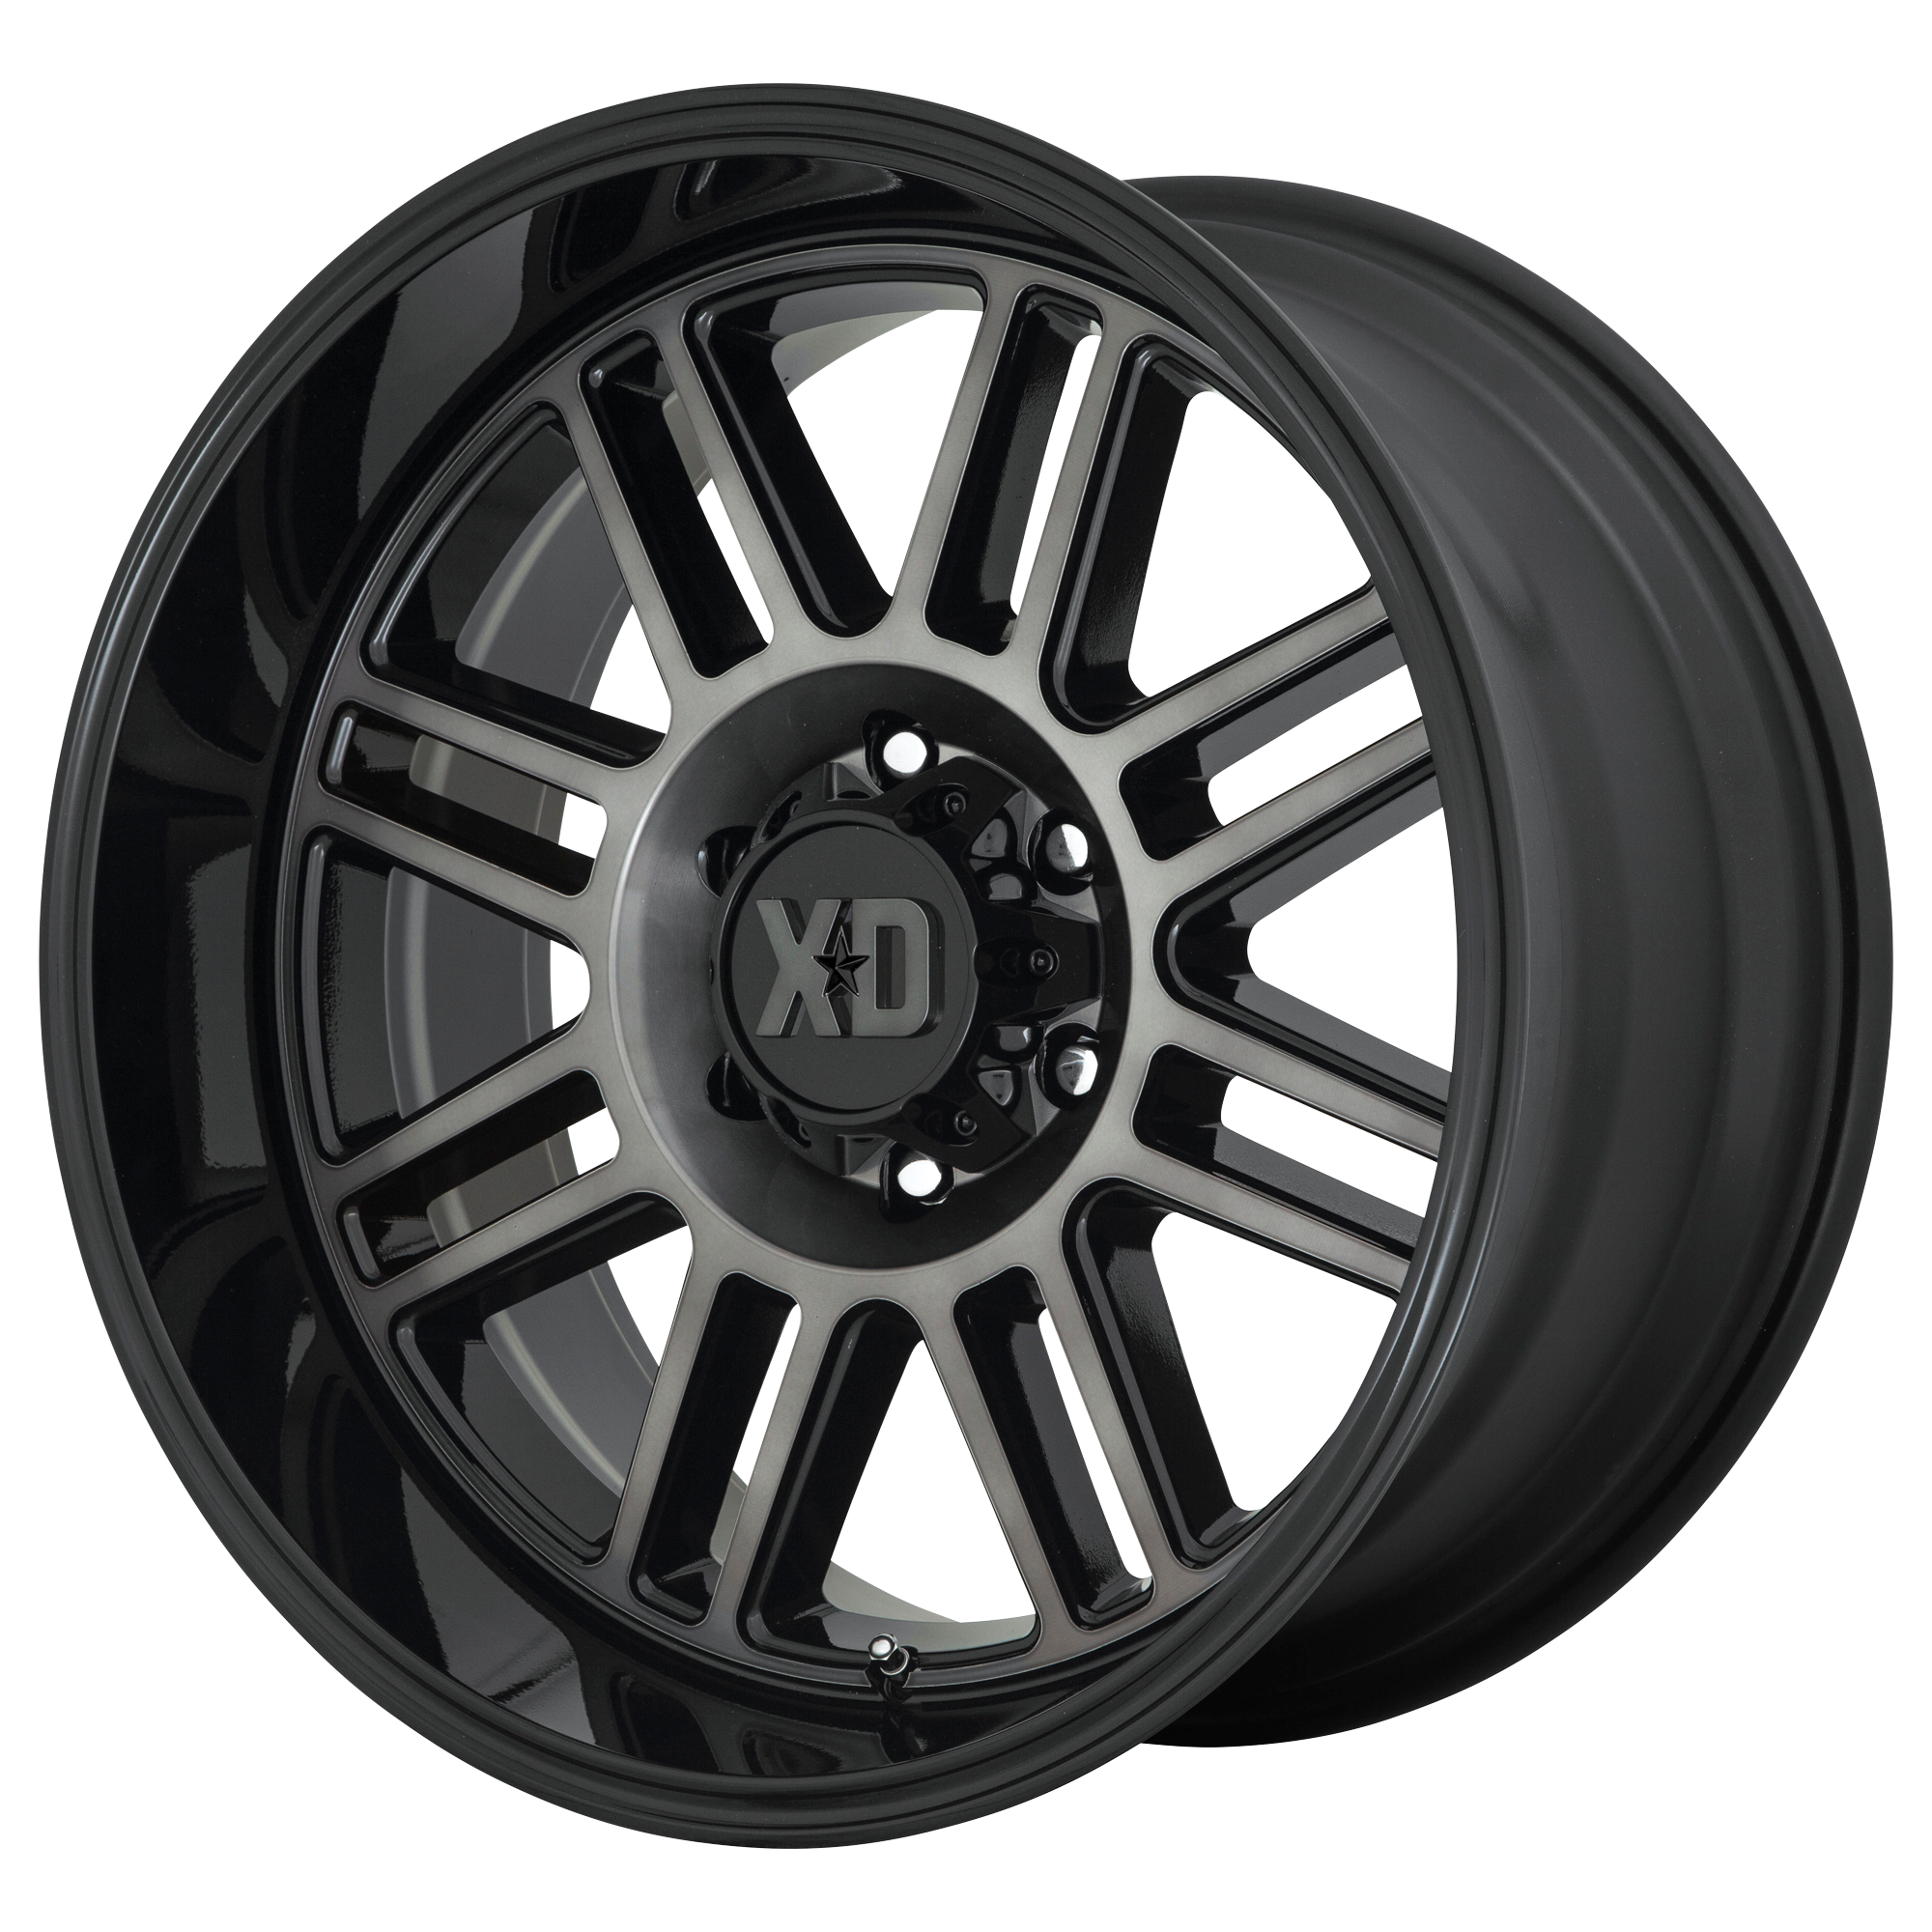 CAGE 20x10 8x180.00 GLOSS BLACK W/ GRAY TINT (-18 mm) - Tires and Engine Performance